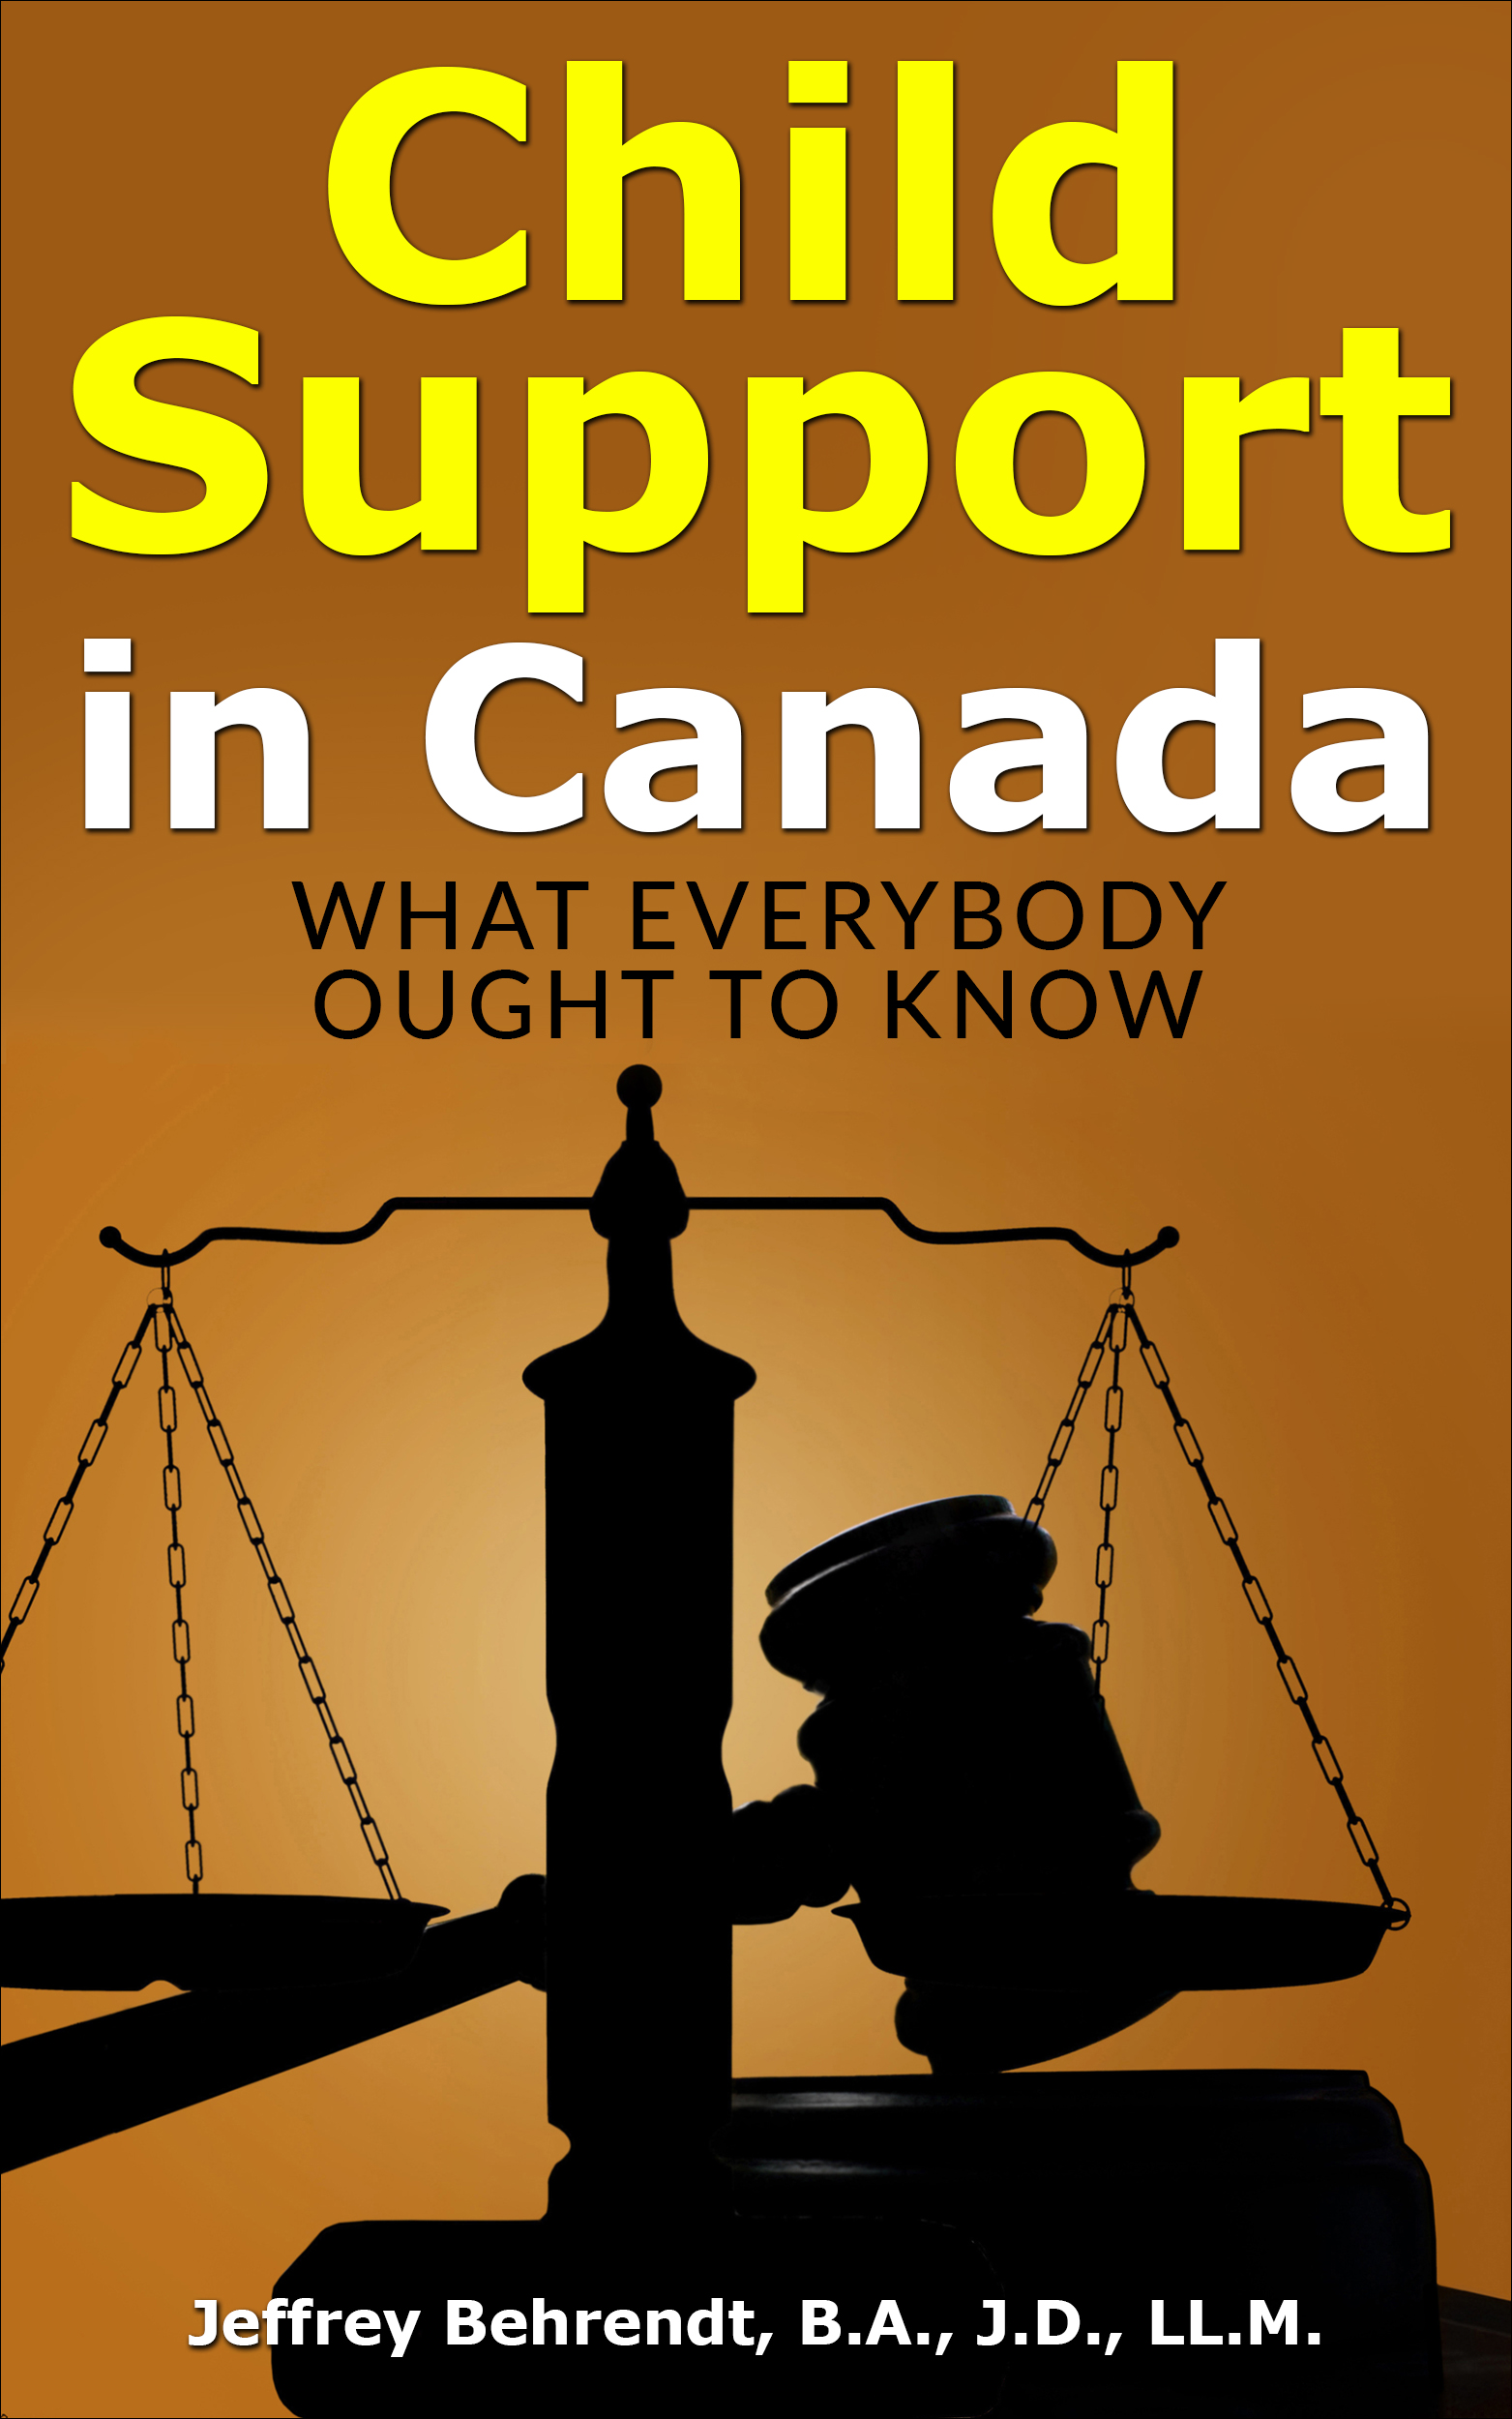 Ontario Child Support Guidelines Chart